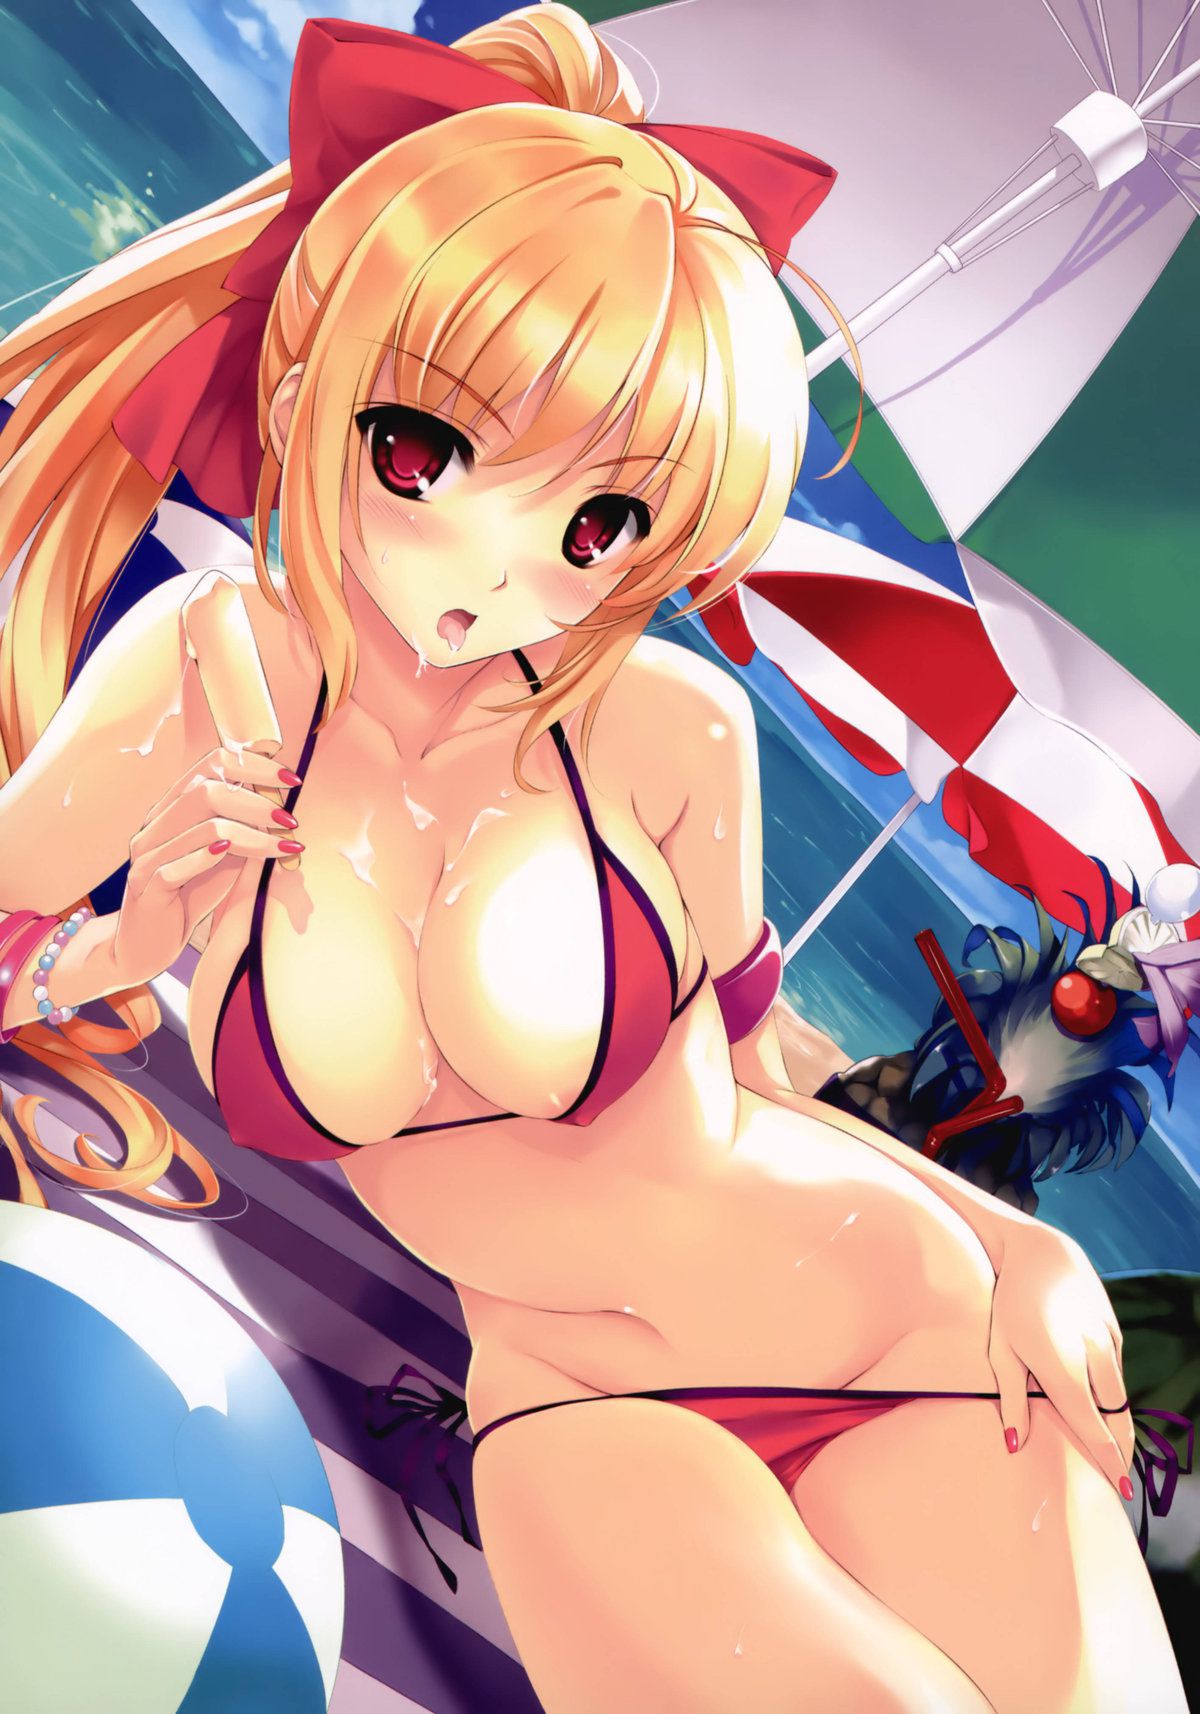 Lewd image of swimsuit with little cloth area I want to expose important parts by shifting the swimsuit 7